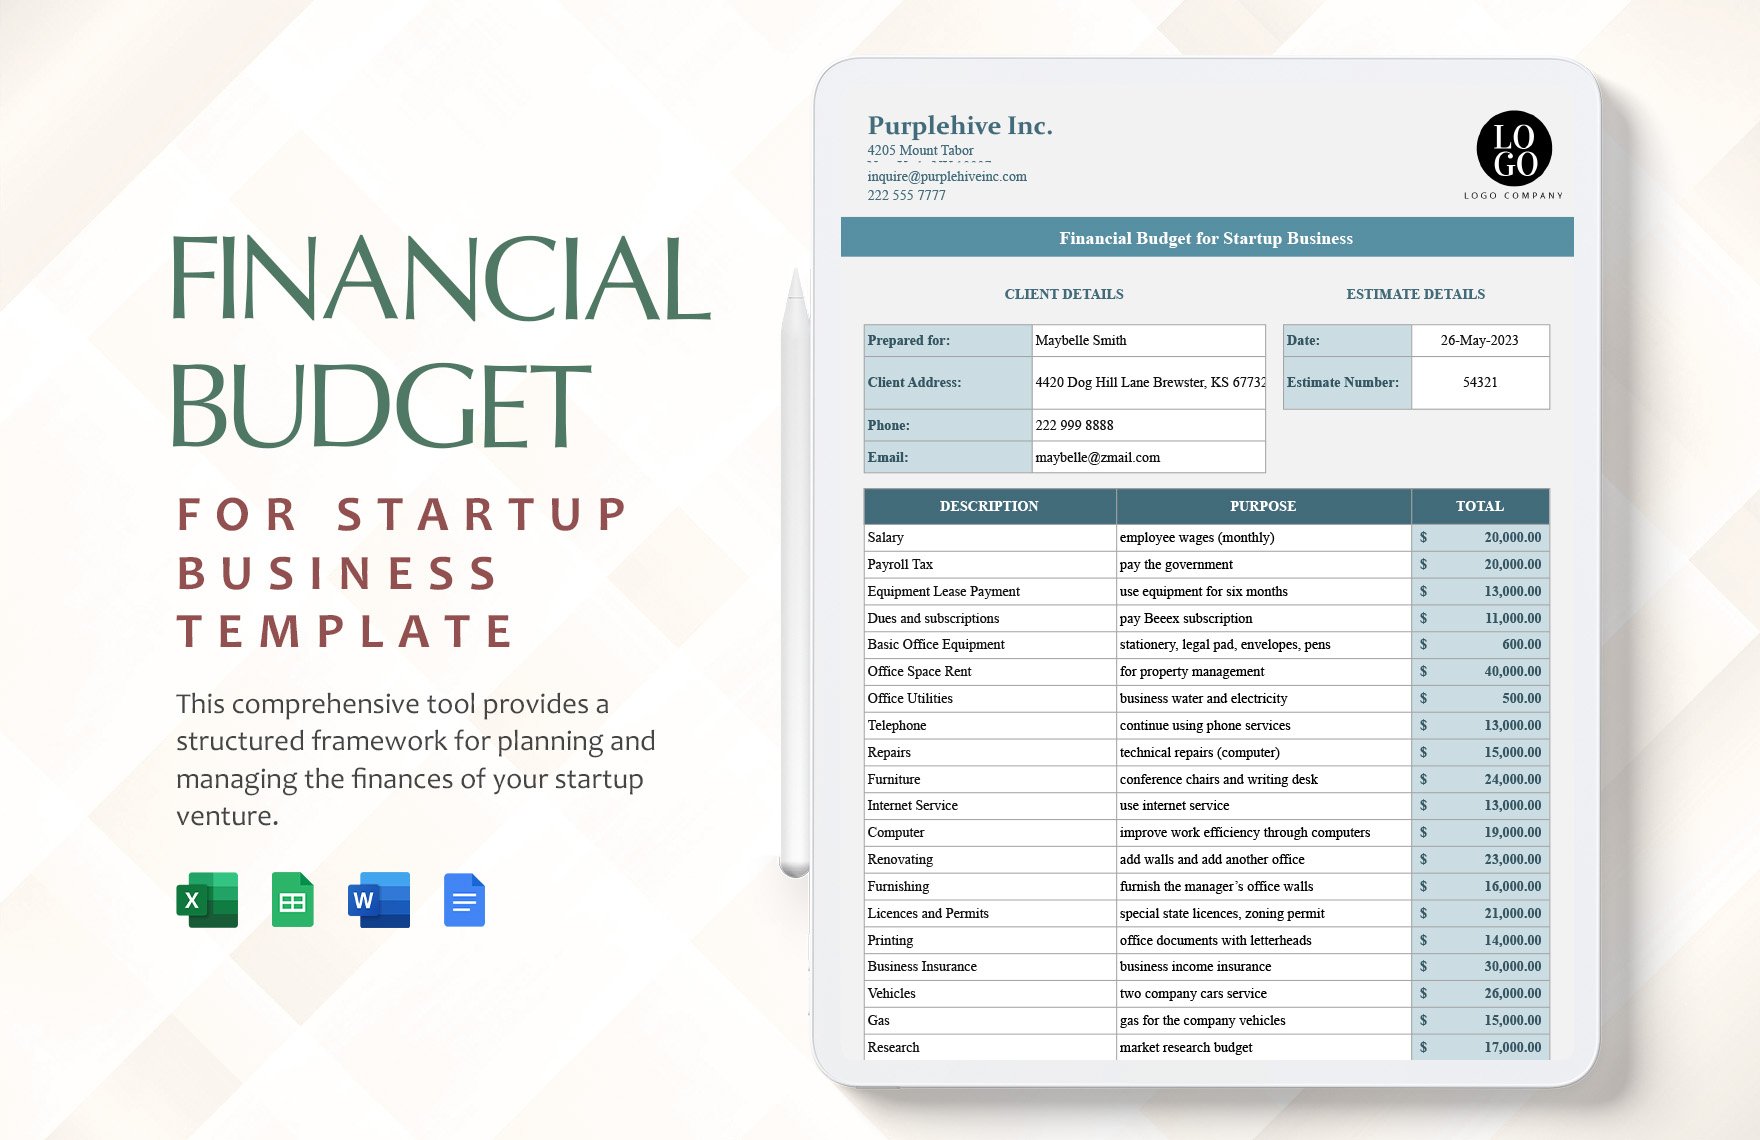 Free Financial Budget for Startup Business Template in Word, Google Docs, Excel, Google Sheets